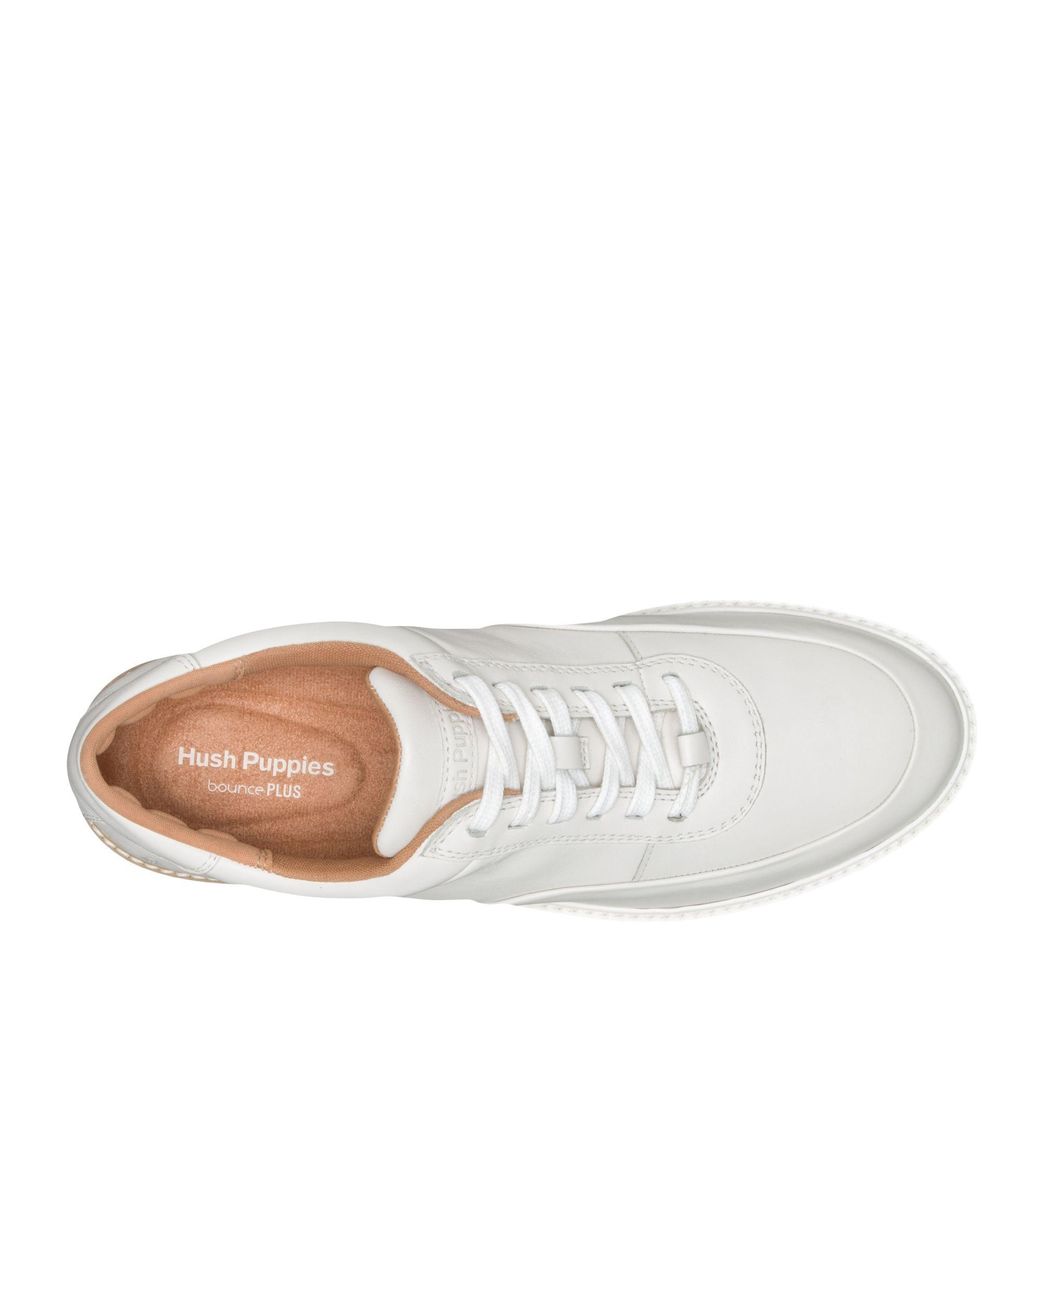 Hush Puppies Keaton Sneaker Sneakers in White Leather (White) for 